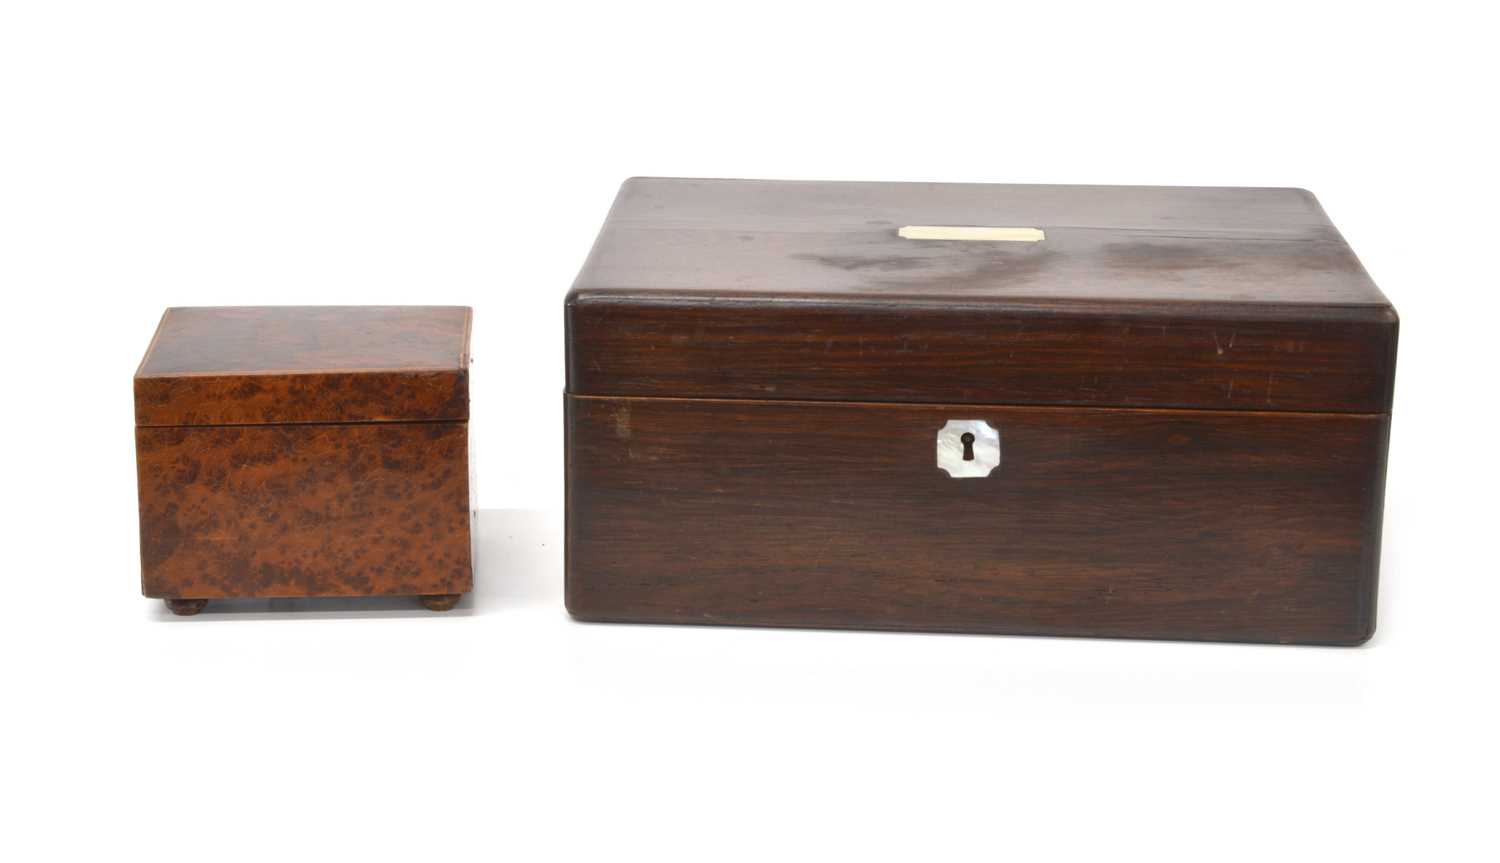 Victorian Jewellery Box and a Musical Box